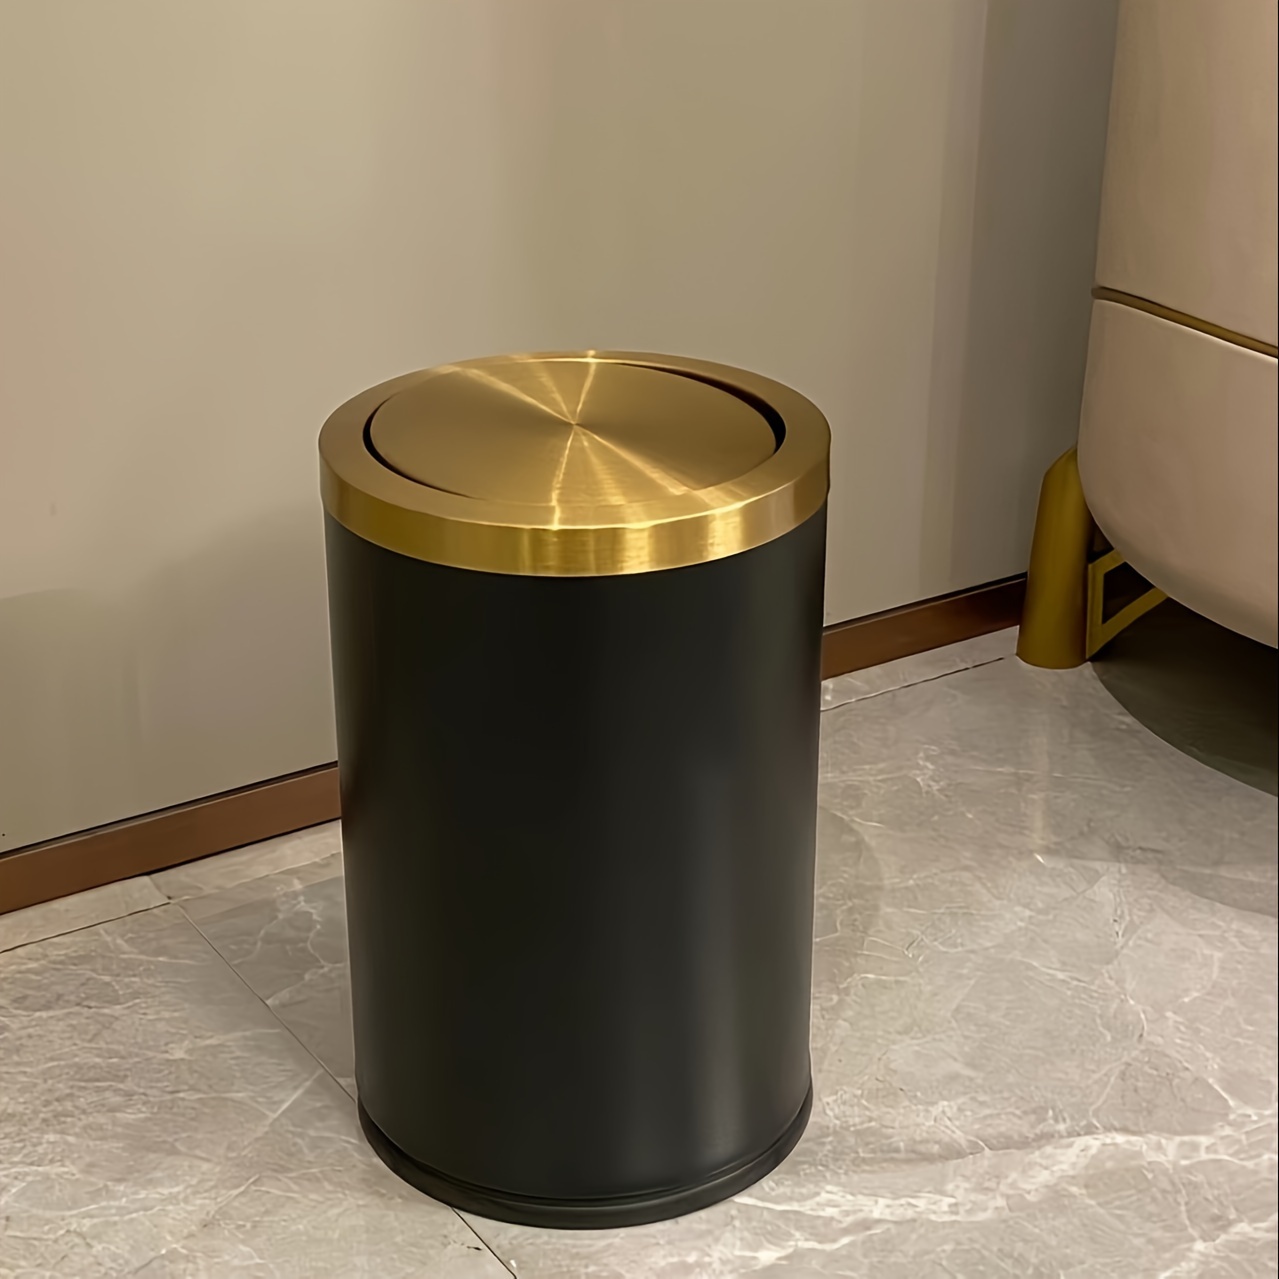 

1pc Elegant Stainless Steel Trash Can With Swing Lid, Metal Waste Bin With Cover, For Kitchen, Living Room, Bedroom, Bathroom, Hotel - Luxurious Home Decor